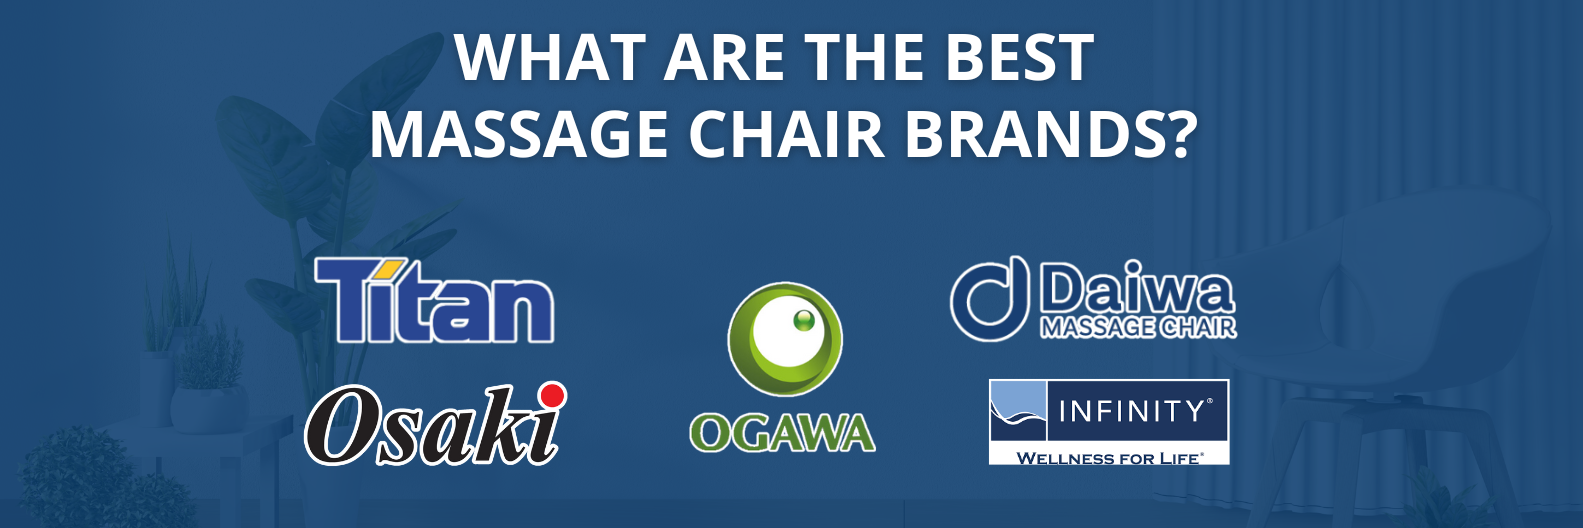 The Modern Back specializes in selling the Best Massage Chair brands in the industry including Daiwa, Osaki, Luraco, Titan, and Infinity.   